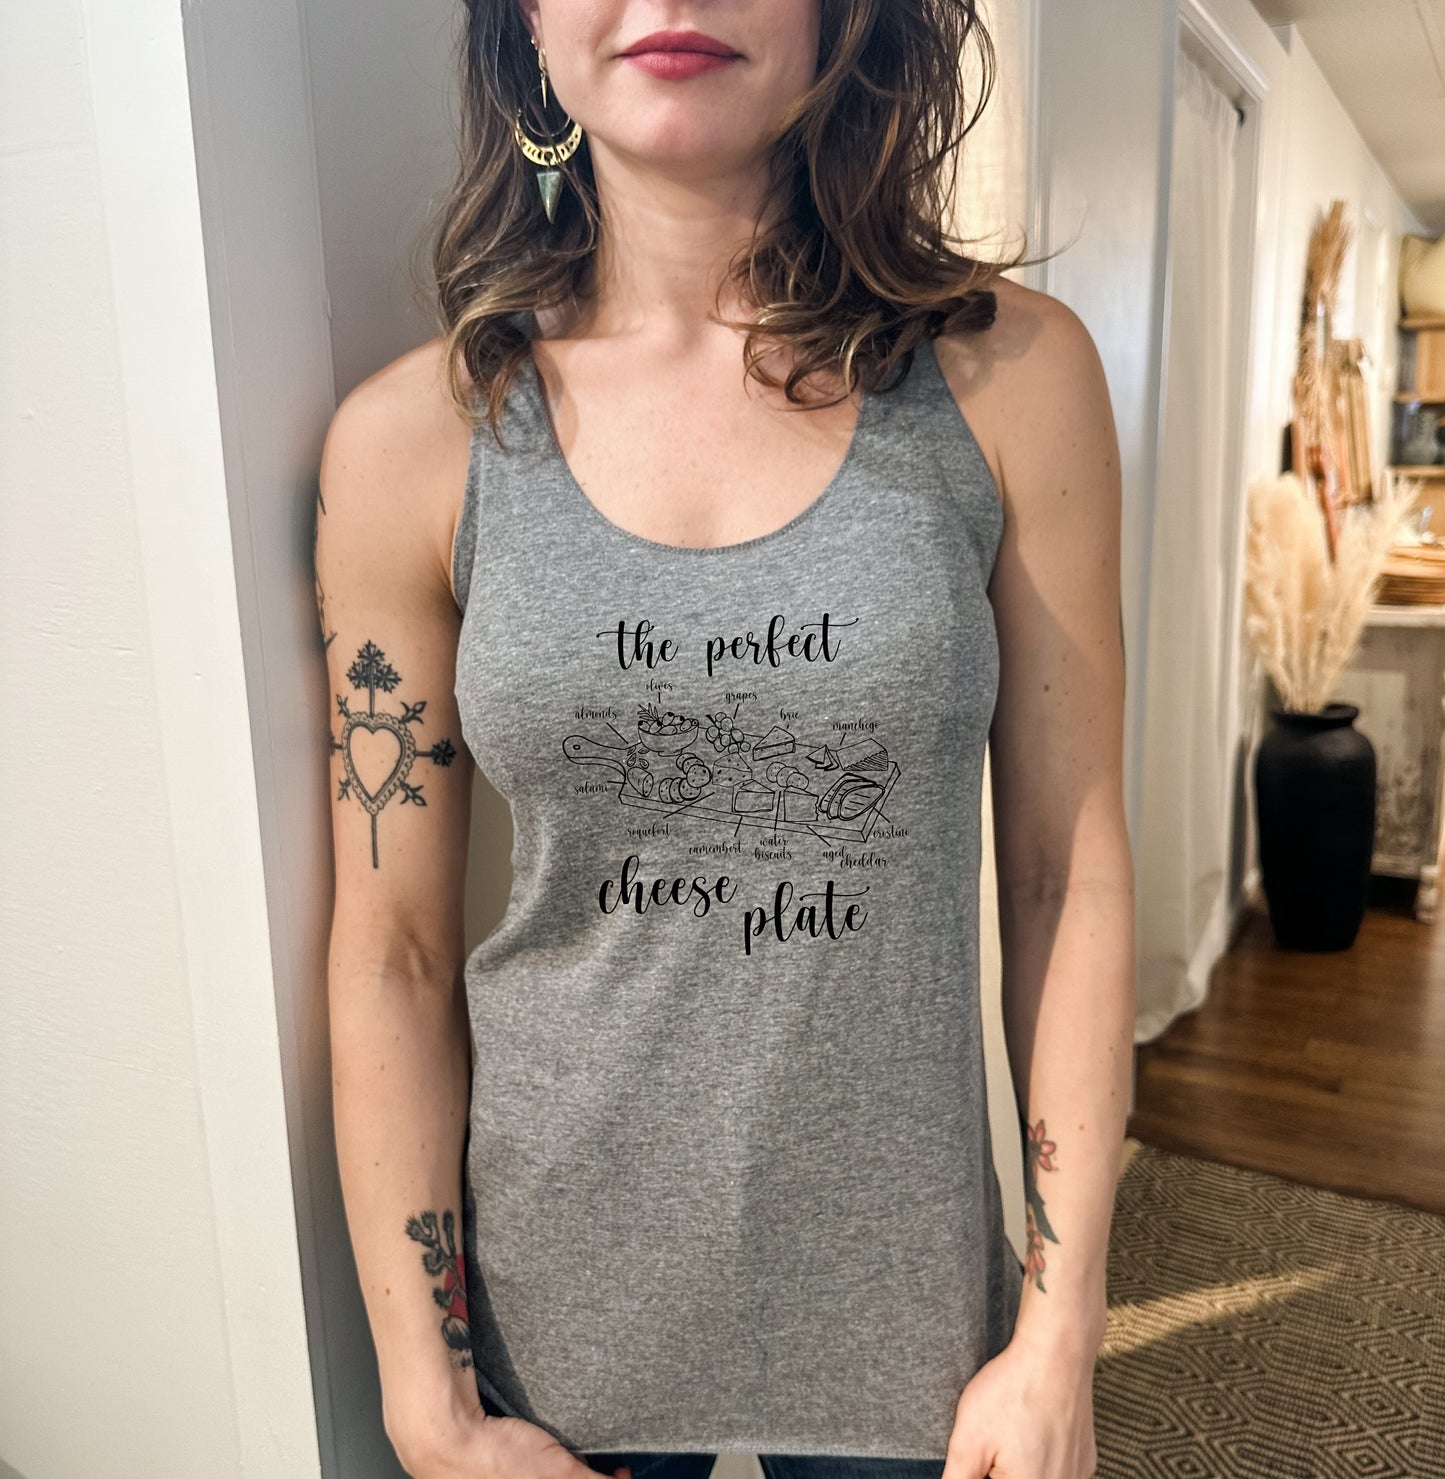 The Perfect Cheese Plate - Women's Tank - Heather Gray, Tahiti, or Envy